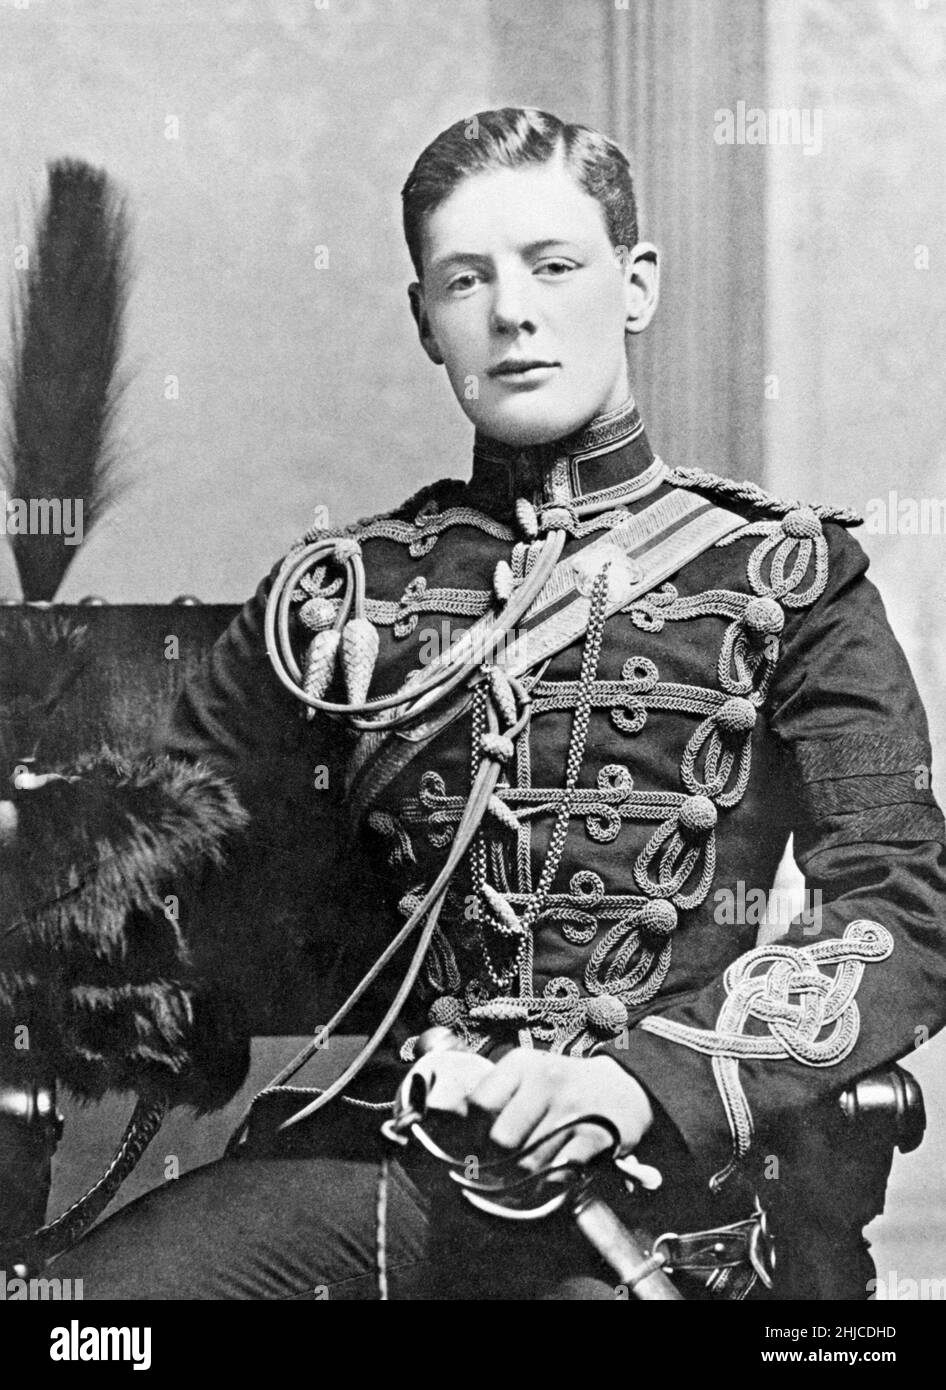 Winston Churchill. British statesman who served as Prime minister of the United Kingdom from 1940 to 1945 during the Second world war. Born on november 30 1874, dead january 24 1965. Picture taken when he 20 years old wearing the uniform of the Husars. Stock Photo